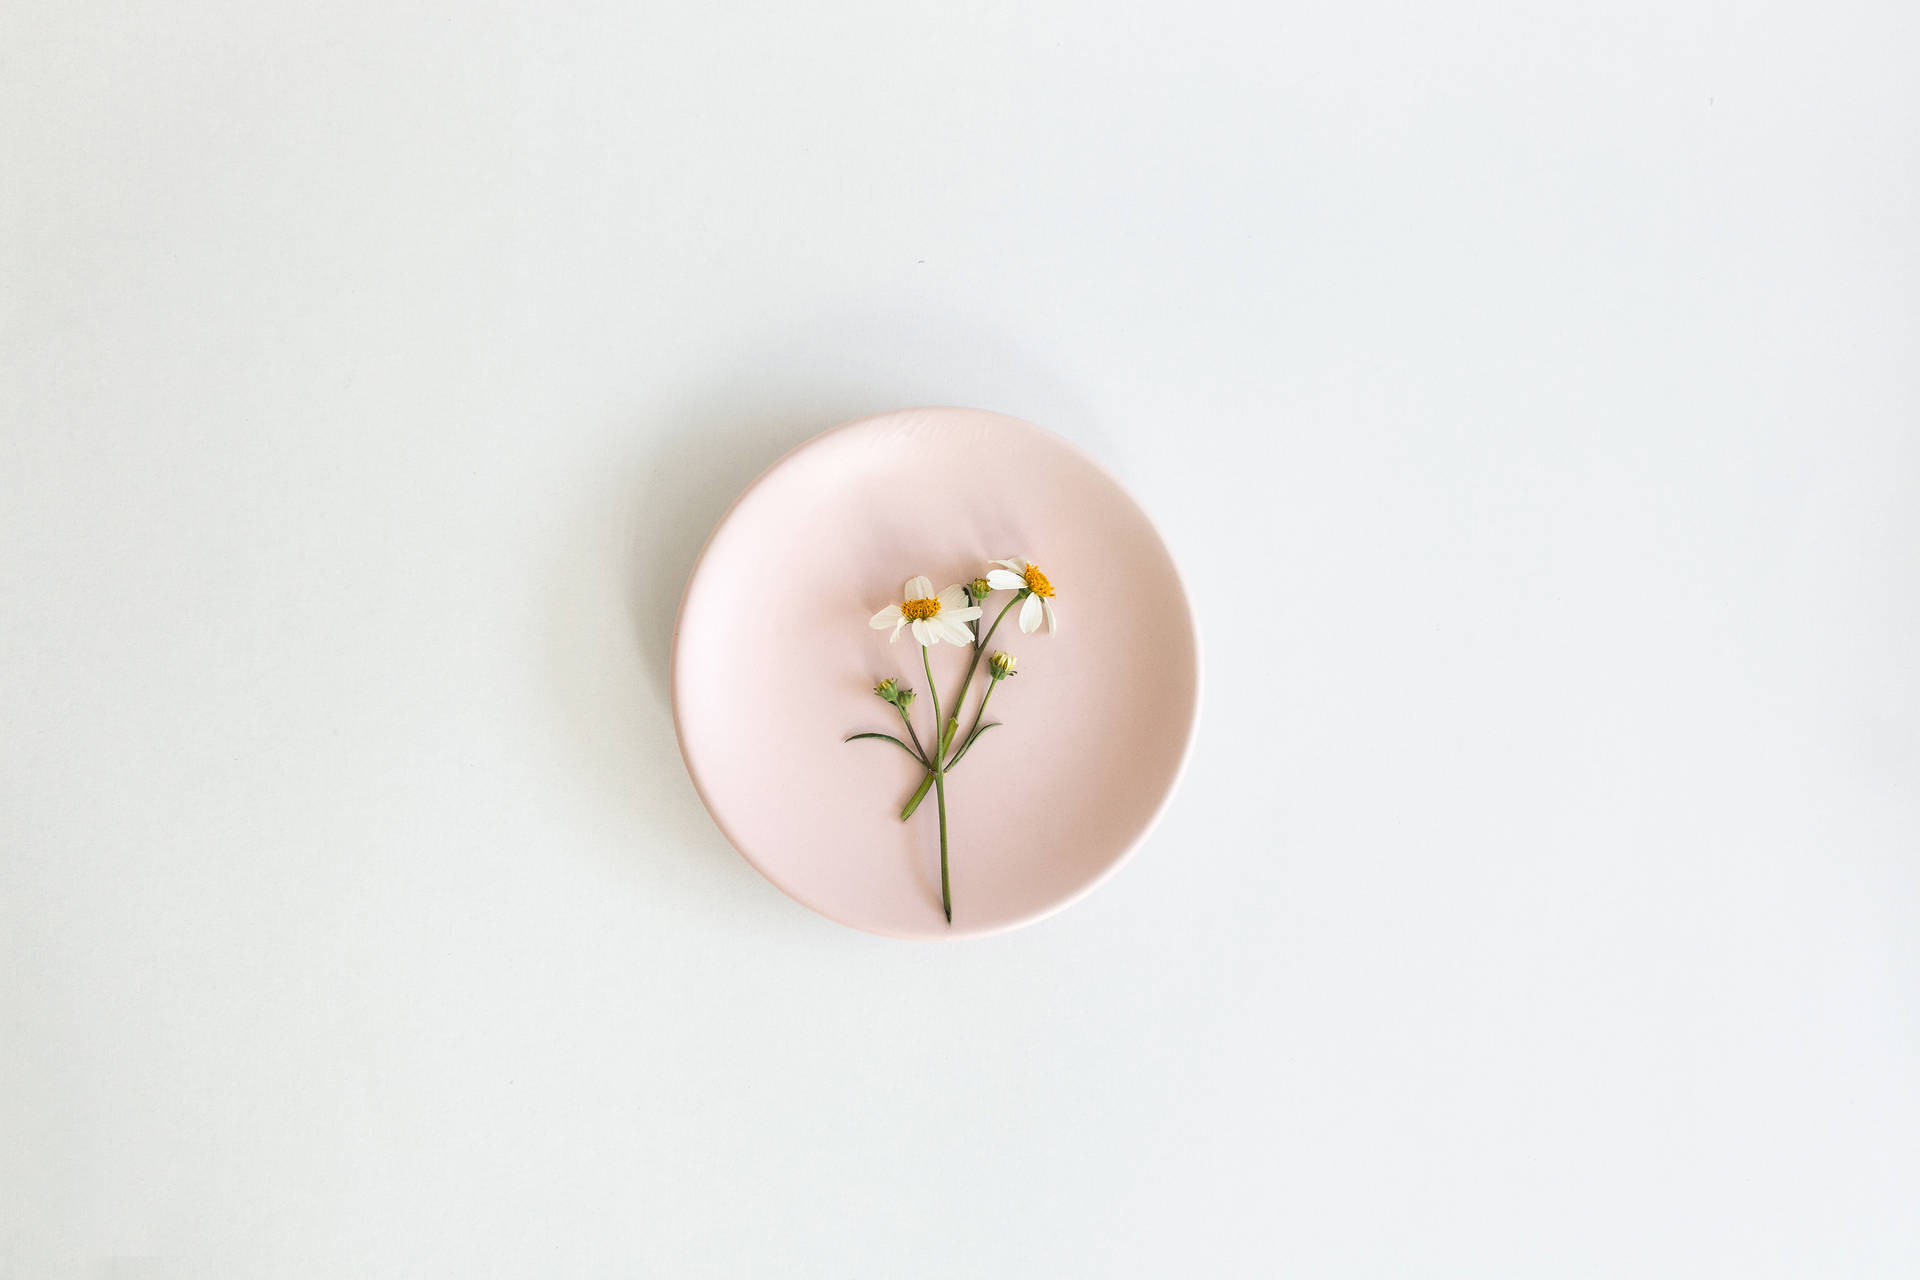 Aesthetic Pink Desktop Plate And Flower Background